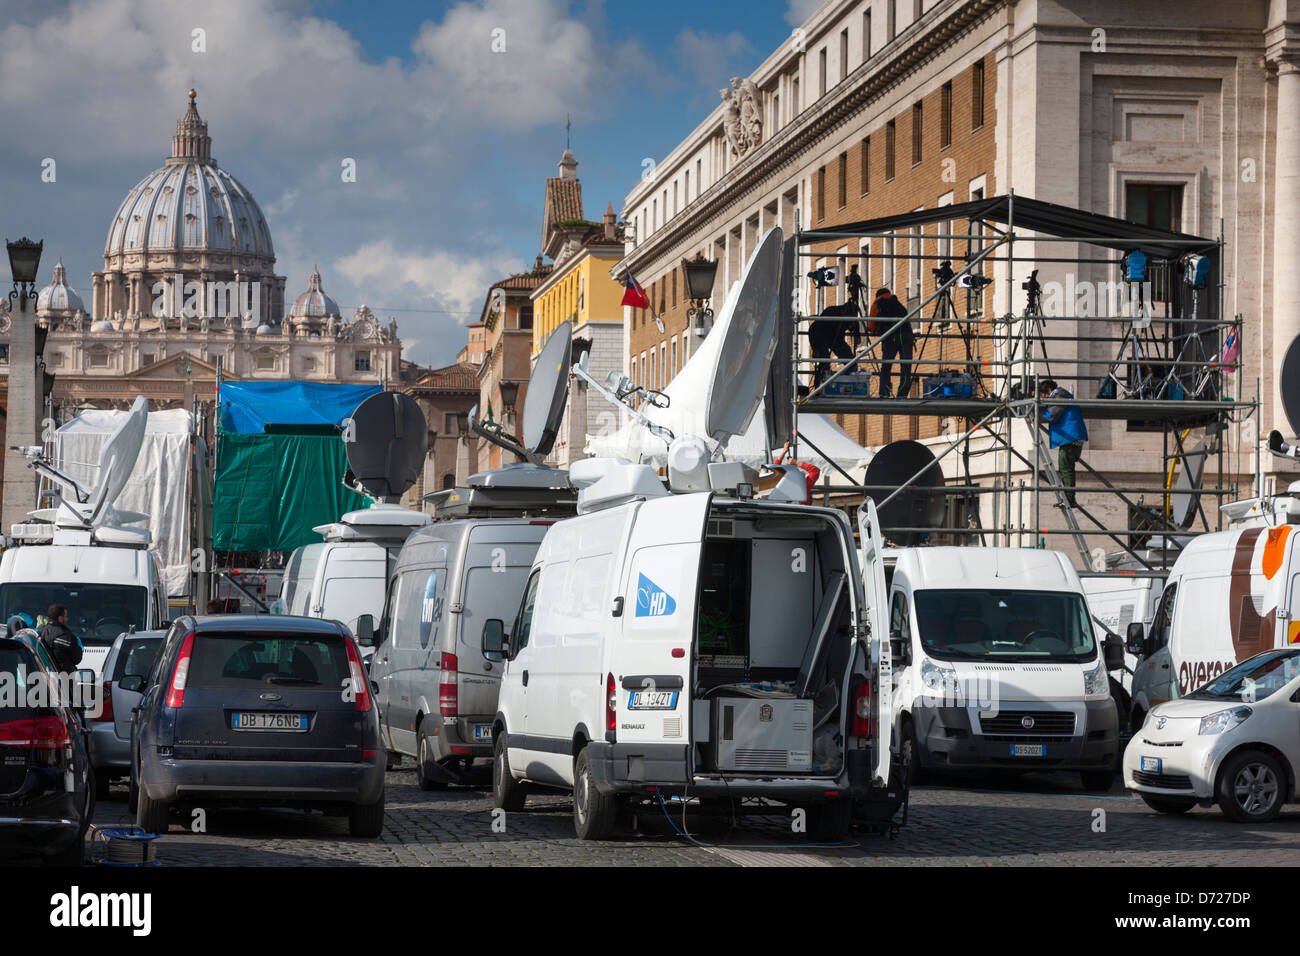 St Peter's Basilica and the world's media near the Vatican the day after the resignation of Pope Benedict XVI, Rome, Italy Stock Photo